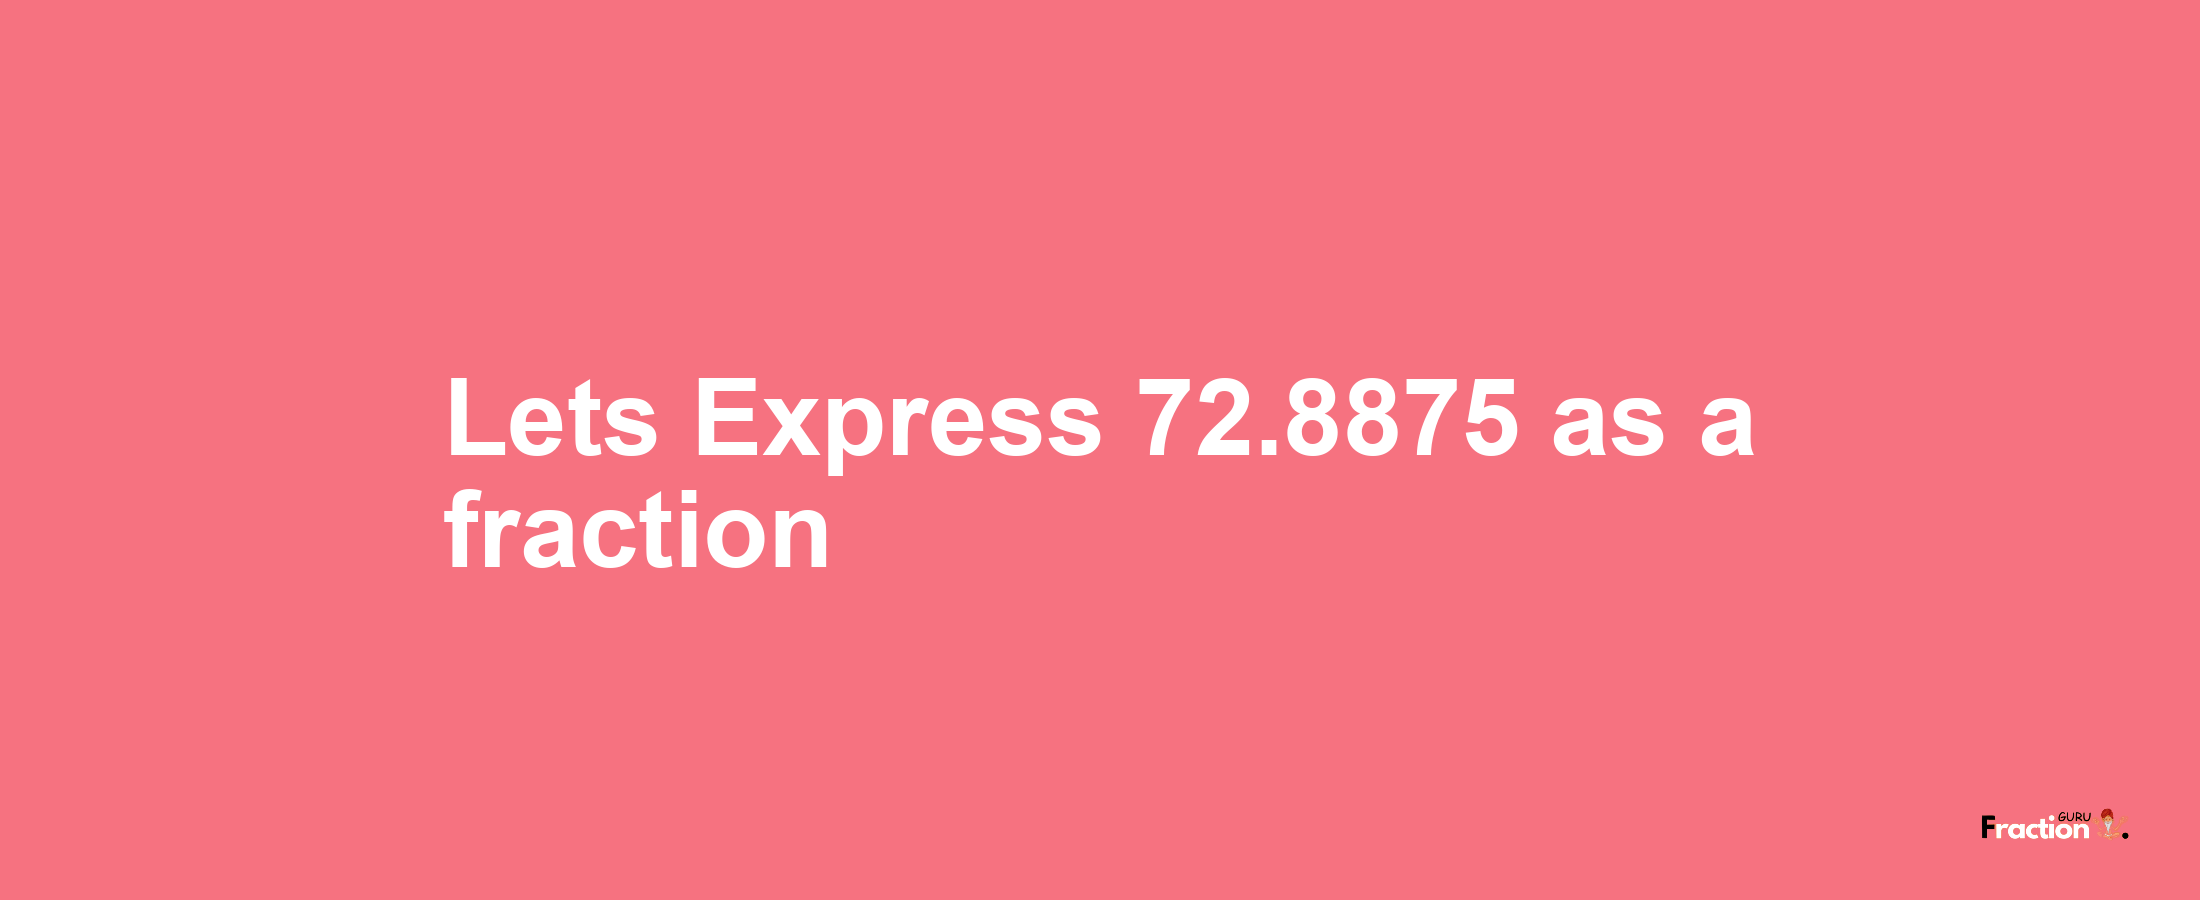 Lets Express 72.8875 as afraction